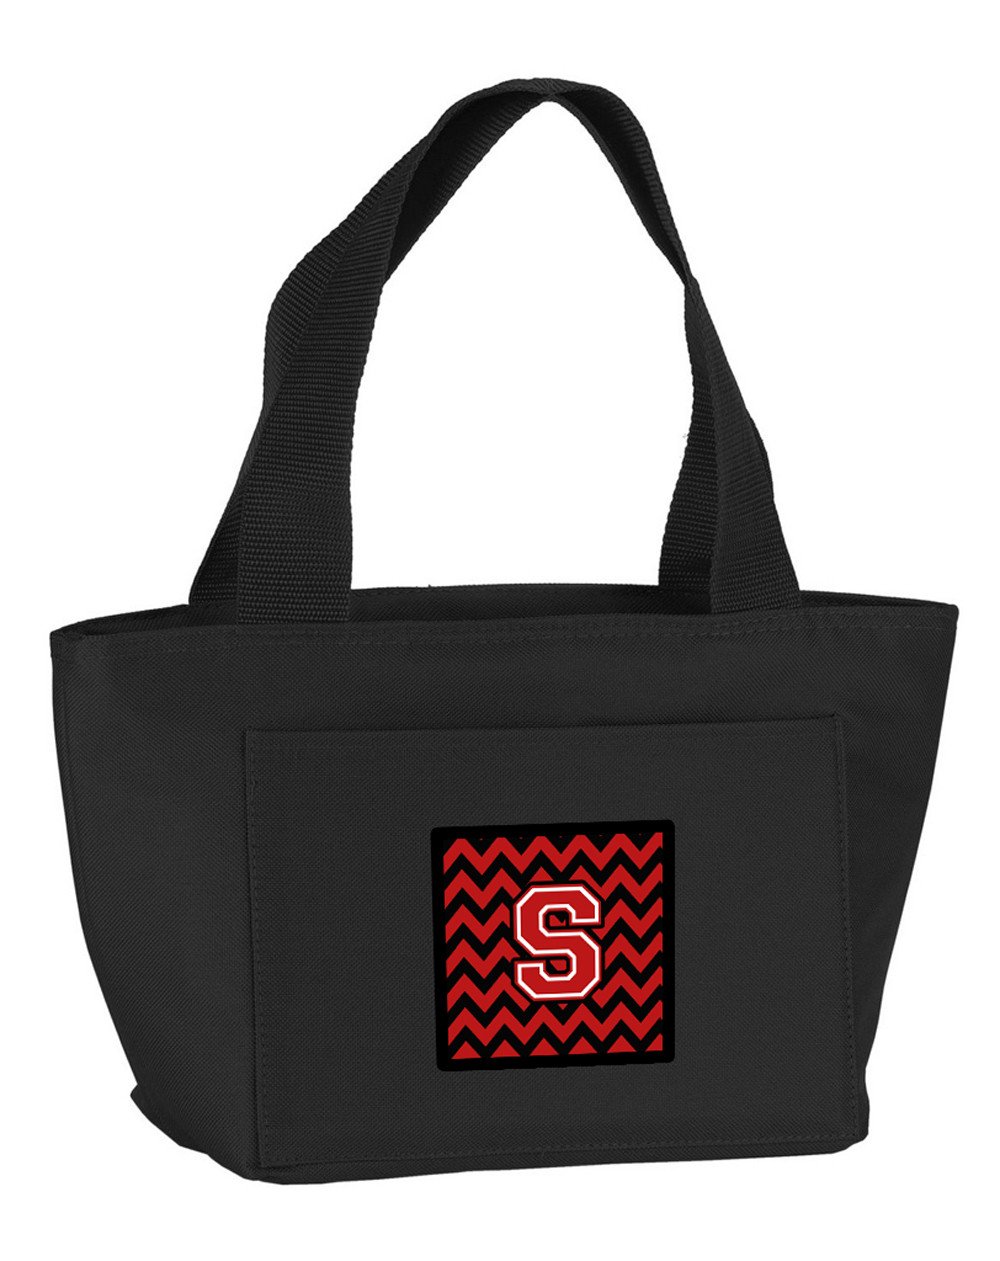 Letter S Chevron Black and Red   Lunch Bag CJ1047-SBK-8808 by Caroline's Treasures